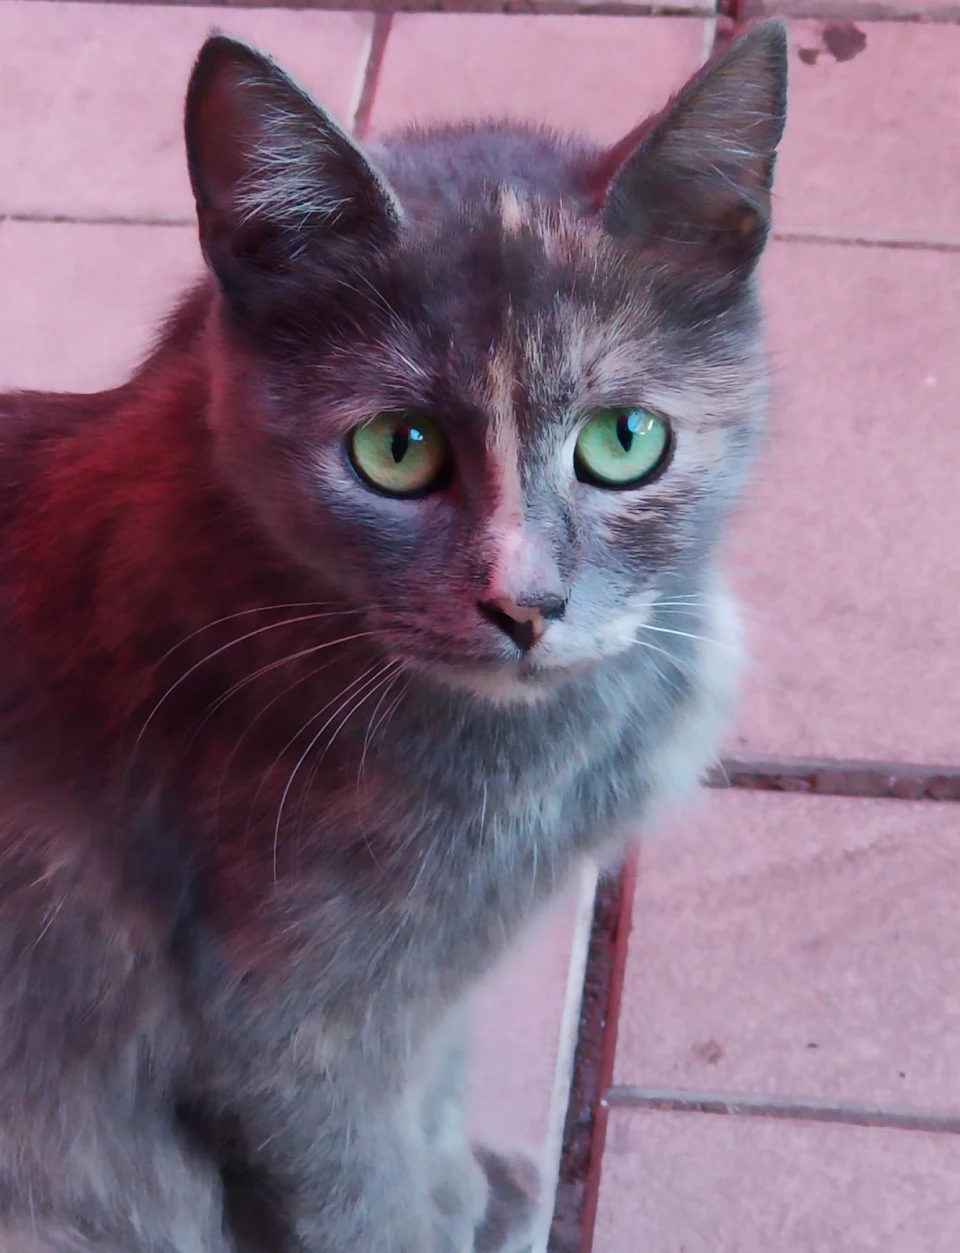 I met this cat on the street. Her eyes captivated me...